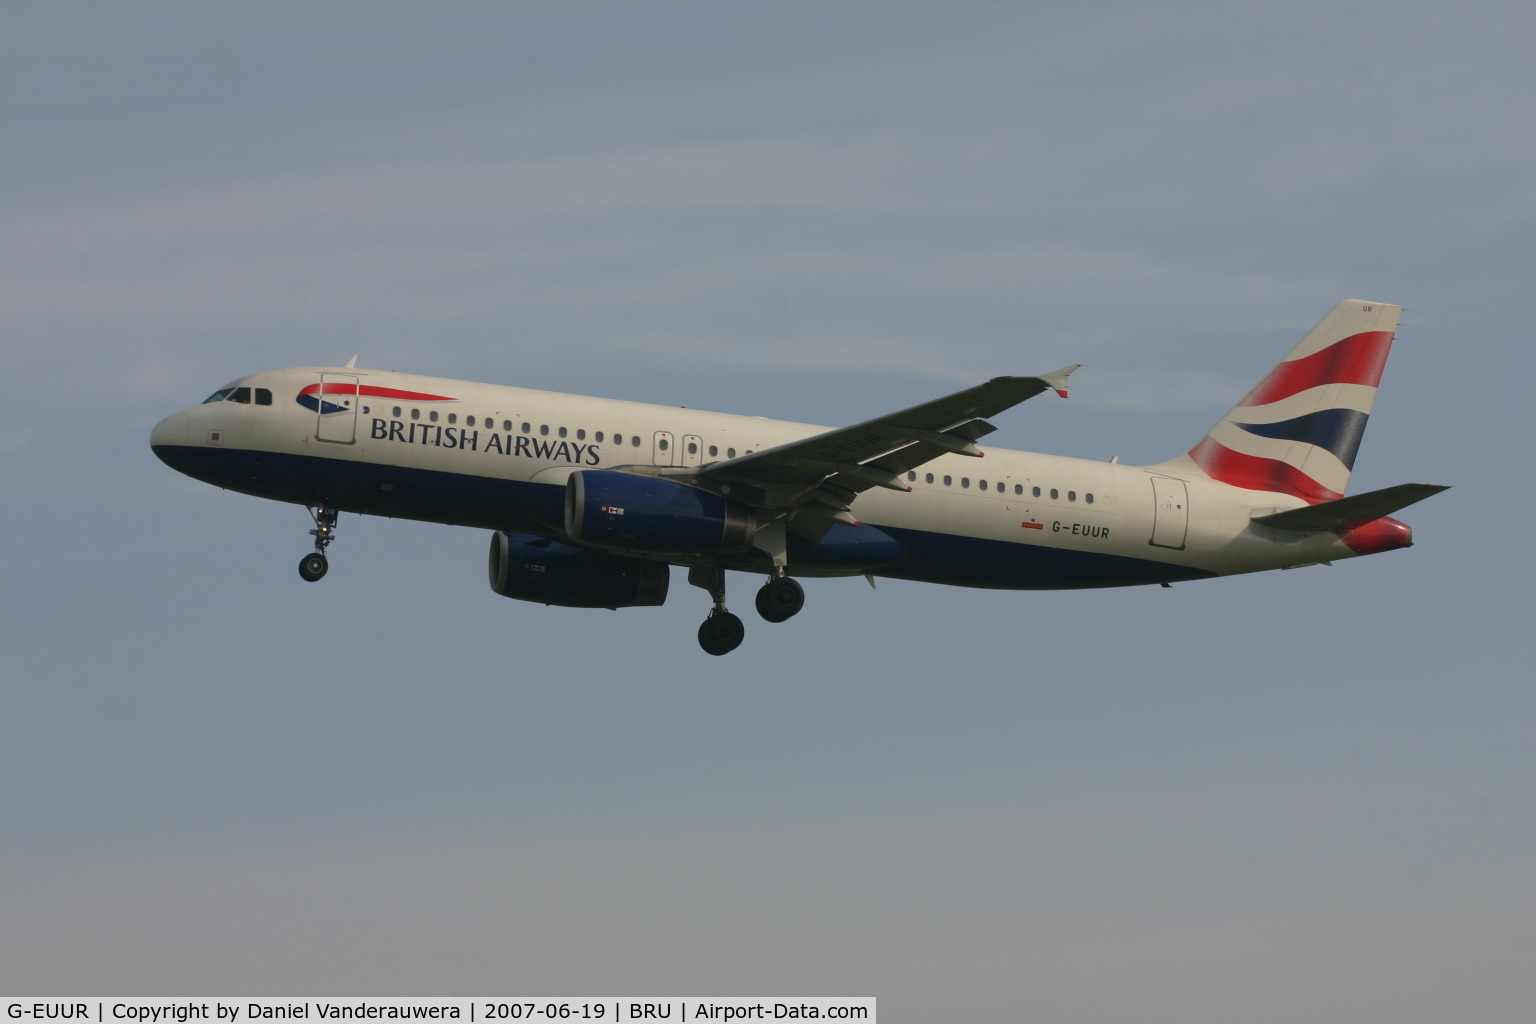 G-EUUR, 2003 Airbus A320-232 C/N 2040, arrival of flight BA388 from LHR